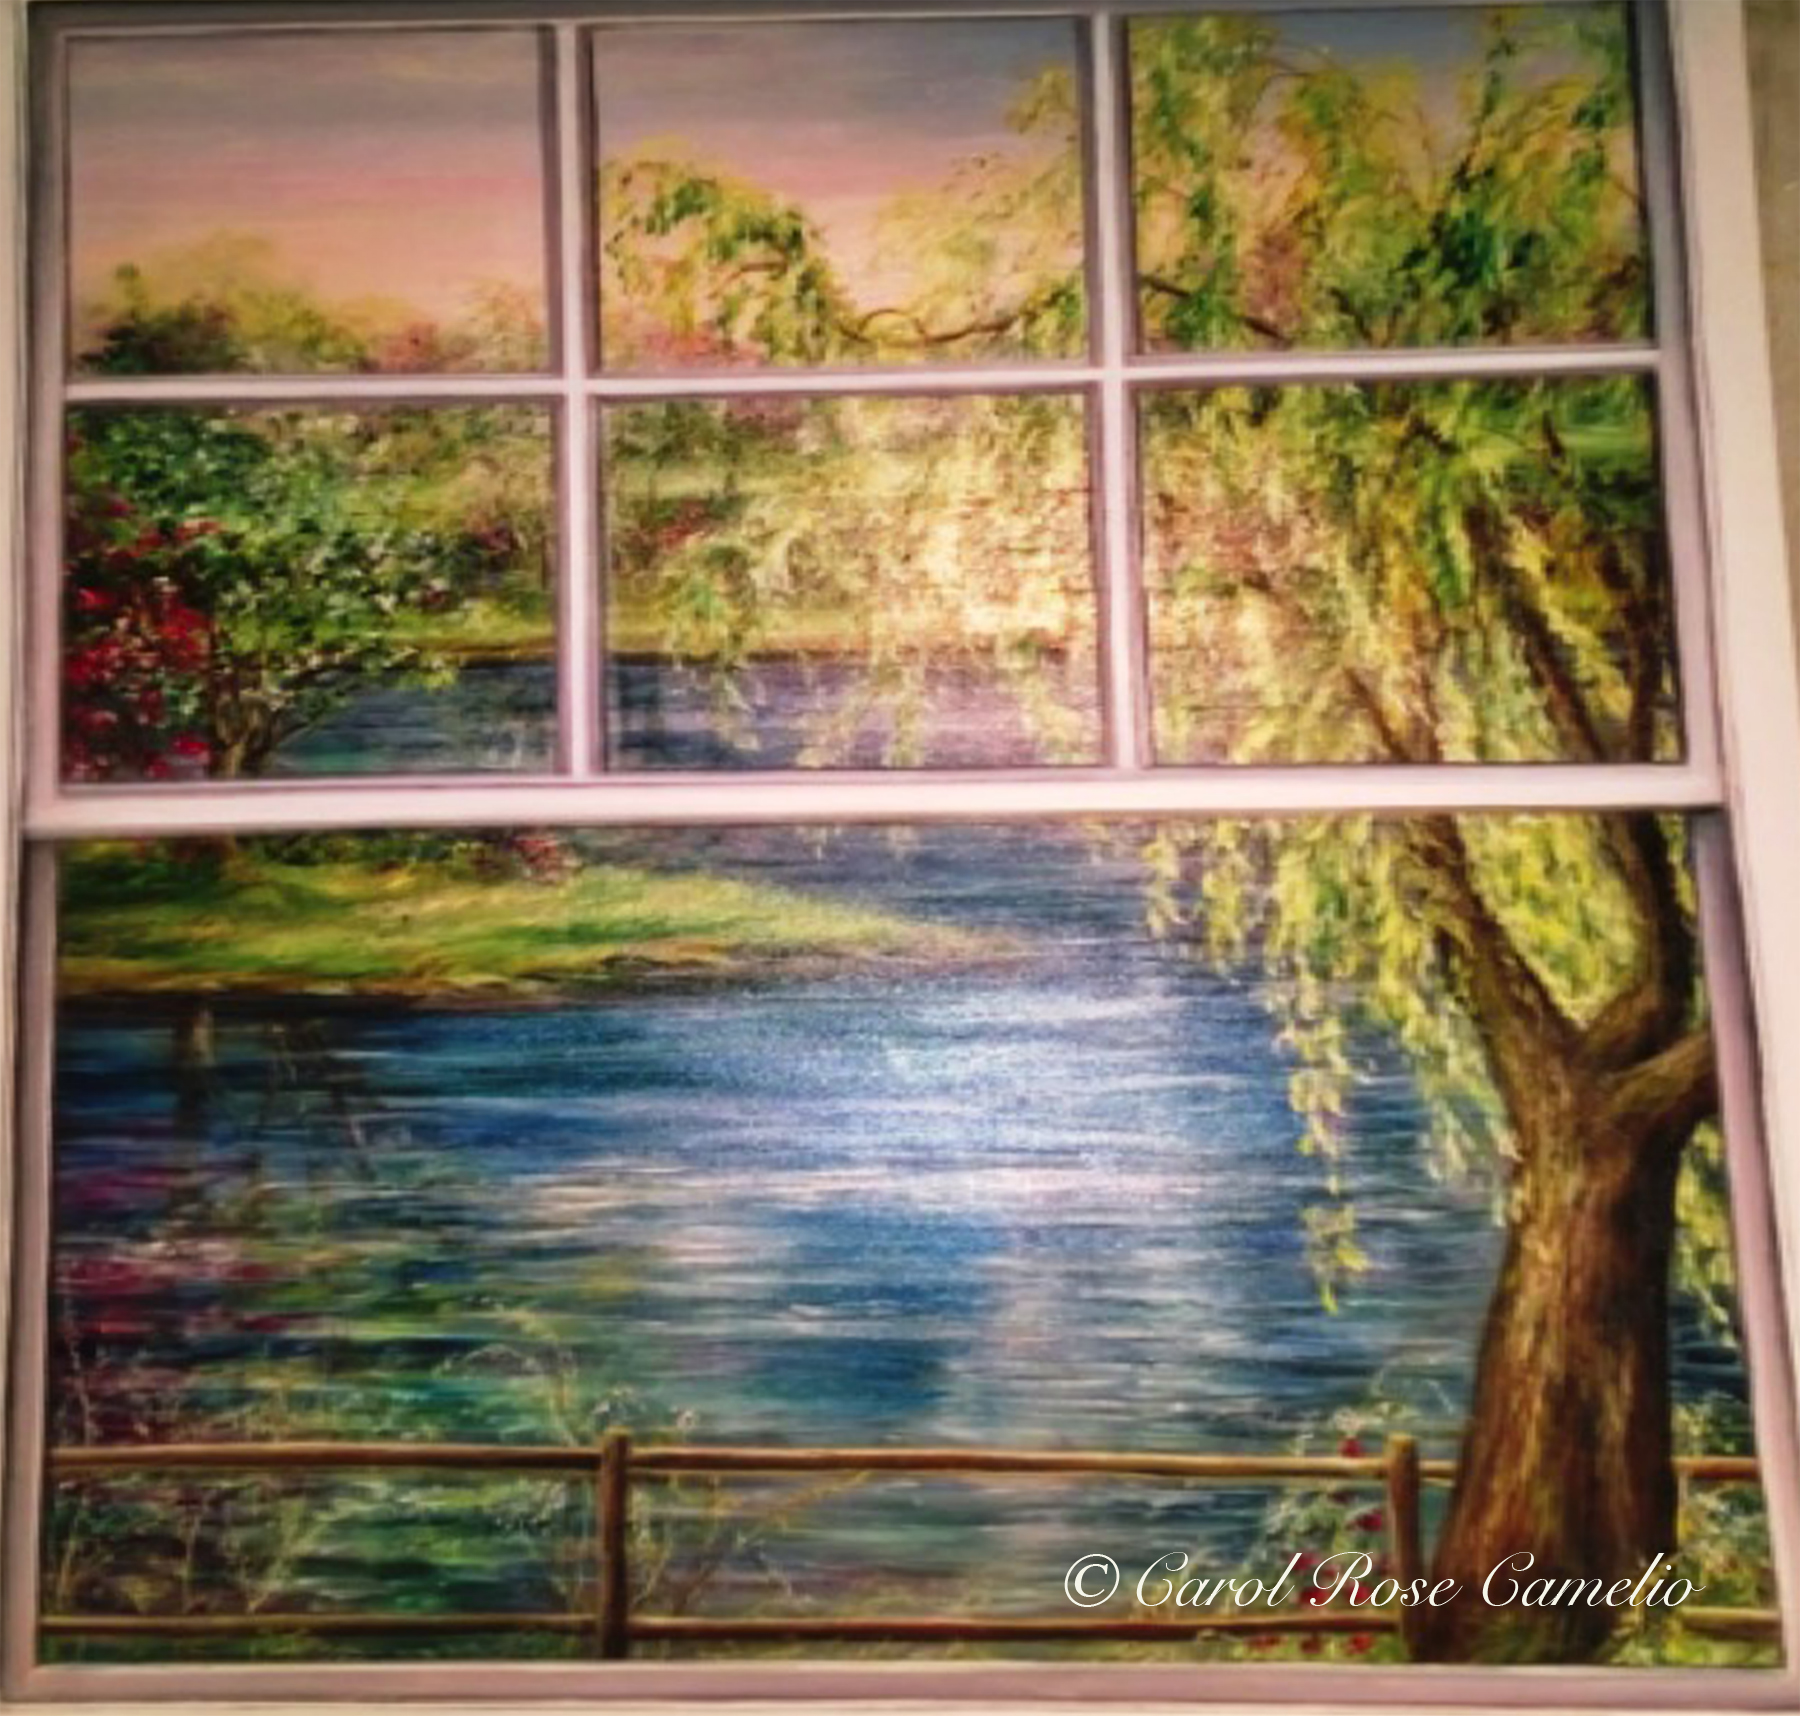 The Pond: A brightly-lit pond surrounded by colorful trees, as seen through a window.